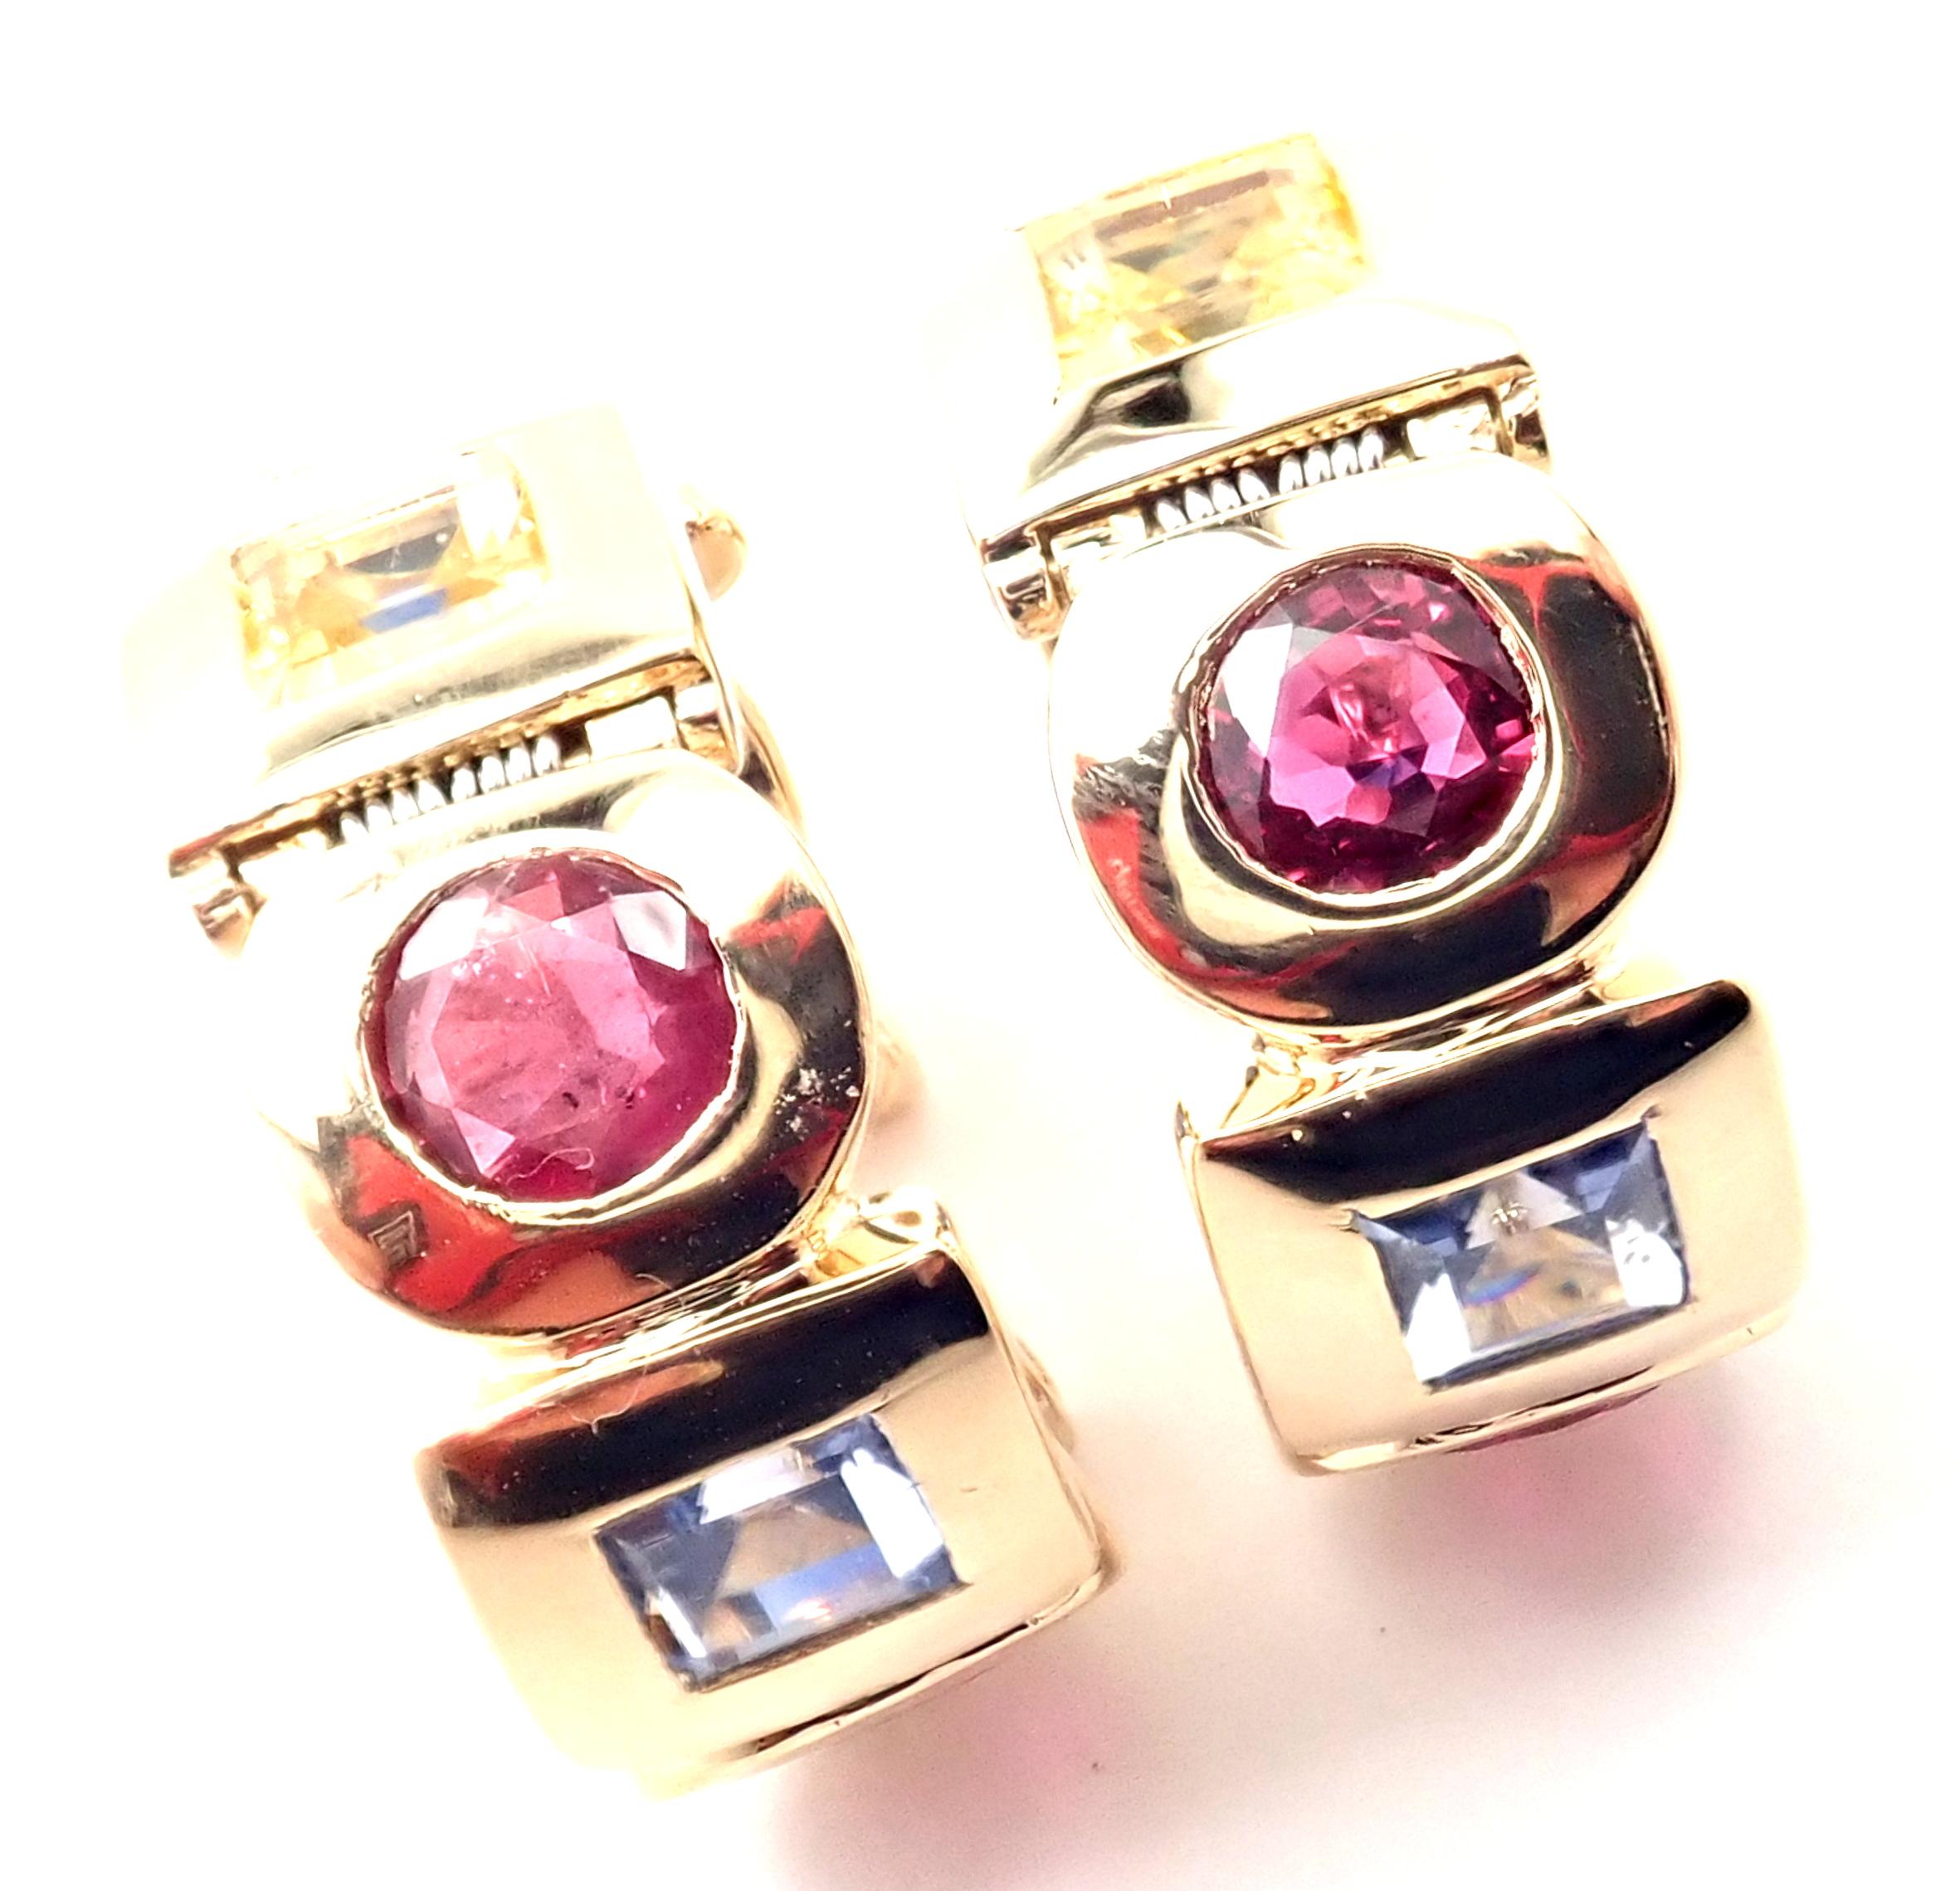 18k Yellow Gold Sapphire Ruby Citrine Hoop Earrings by Chanel. 
With 4 Rubies
6 Sapphires
2 Citrines
These earrings are for pierced ears
Details: 
Weight: 26.8 grams
Measurements: 23mm x 9mm
Stamped Hallmarks: Chanel 750 9D1207
*Free Shipping within